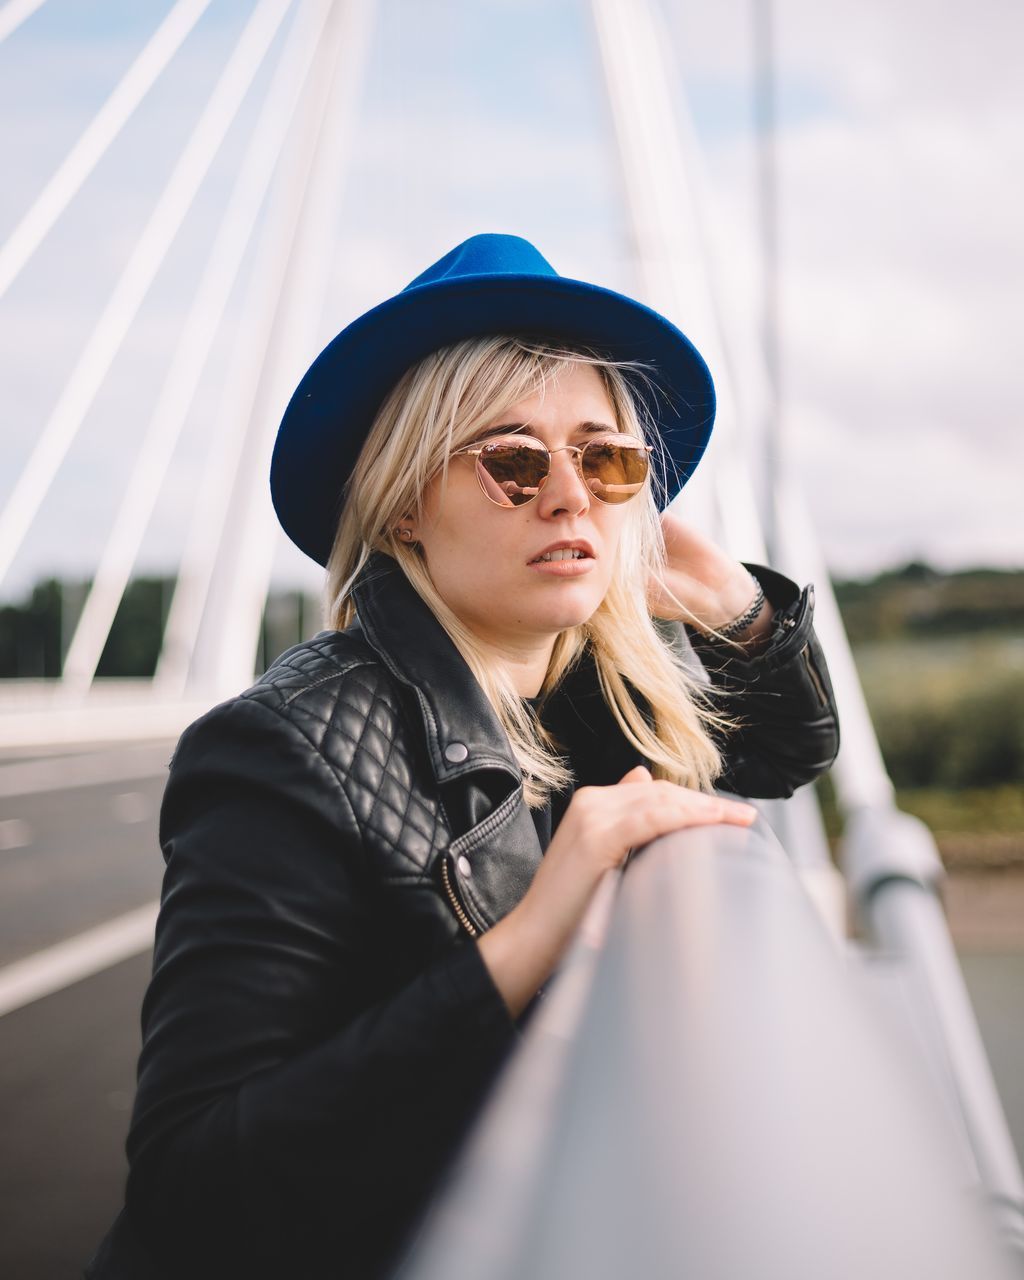 real people, one person, lifestyles, leisure activity, fashion, young women, young adult, sunglasses, blond hair, hair, glasses, women, adult, day, portrait, focus on foreground, casual clothing, clothing, hairstyle, beautiful woman, outdoors